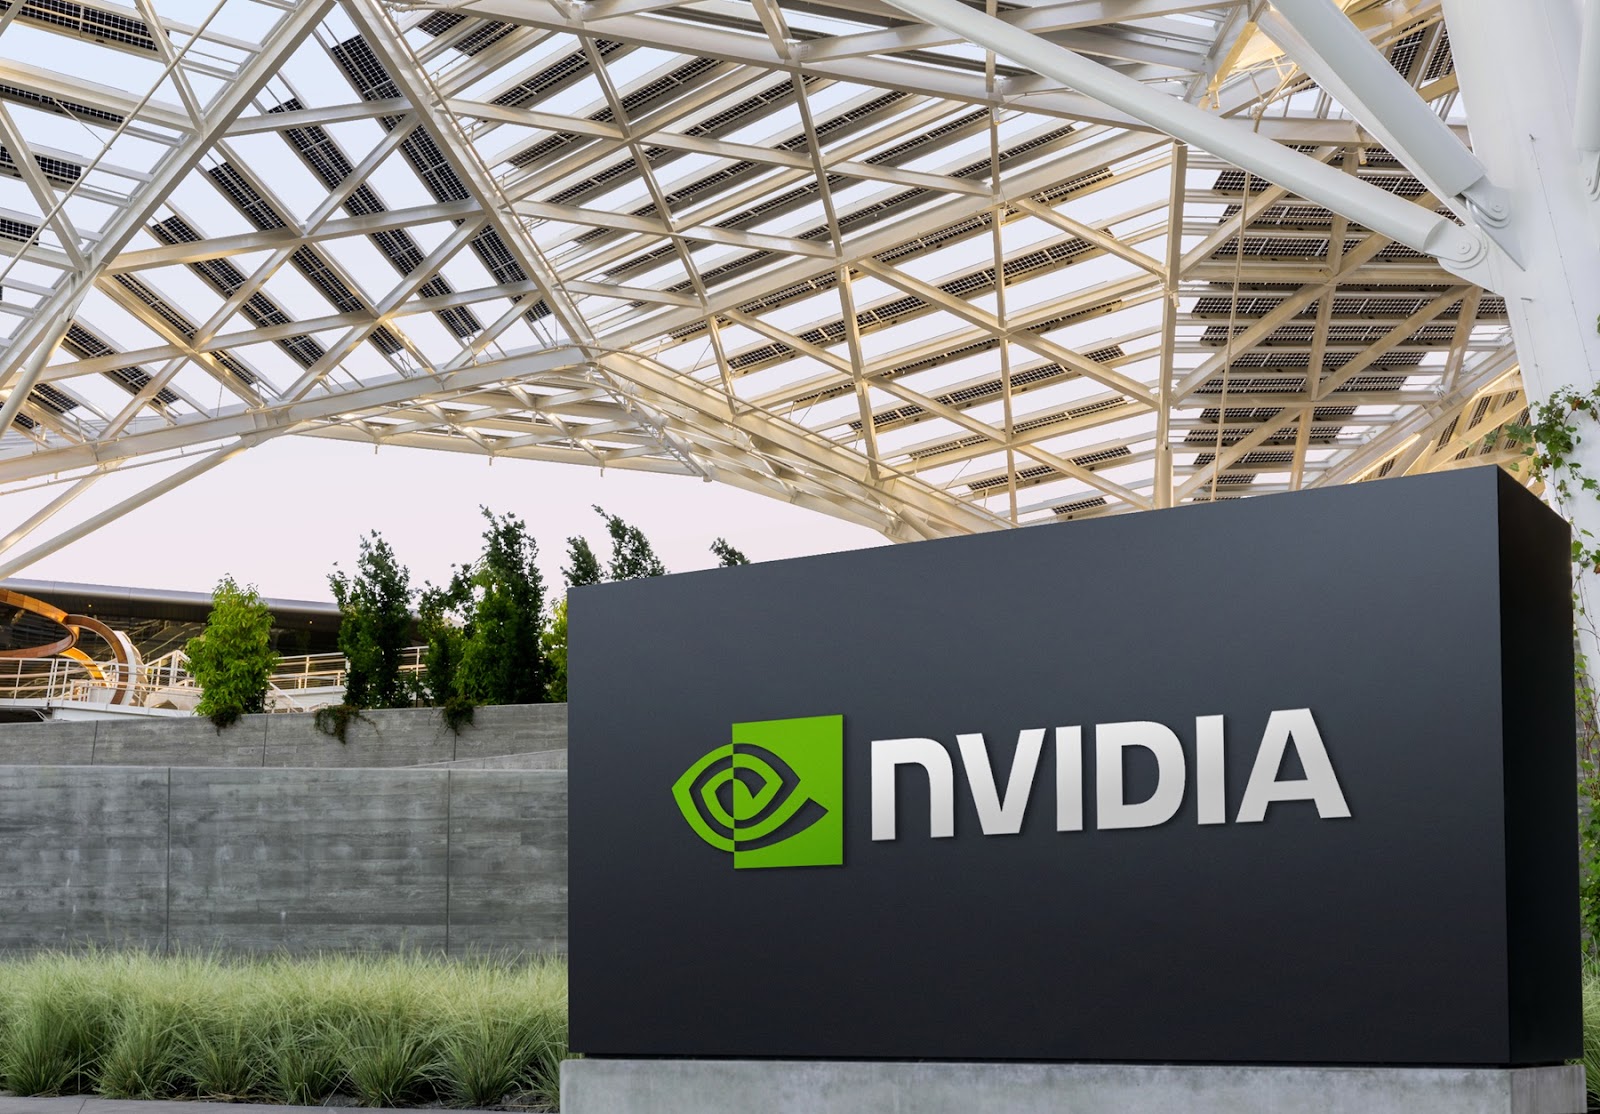 Tech Analyst Dan Ives Draws Parallels Between Nvidia’s Rise and the 90s Internet Explosion